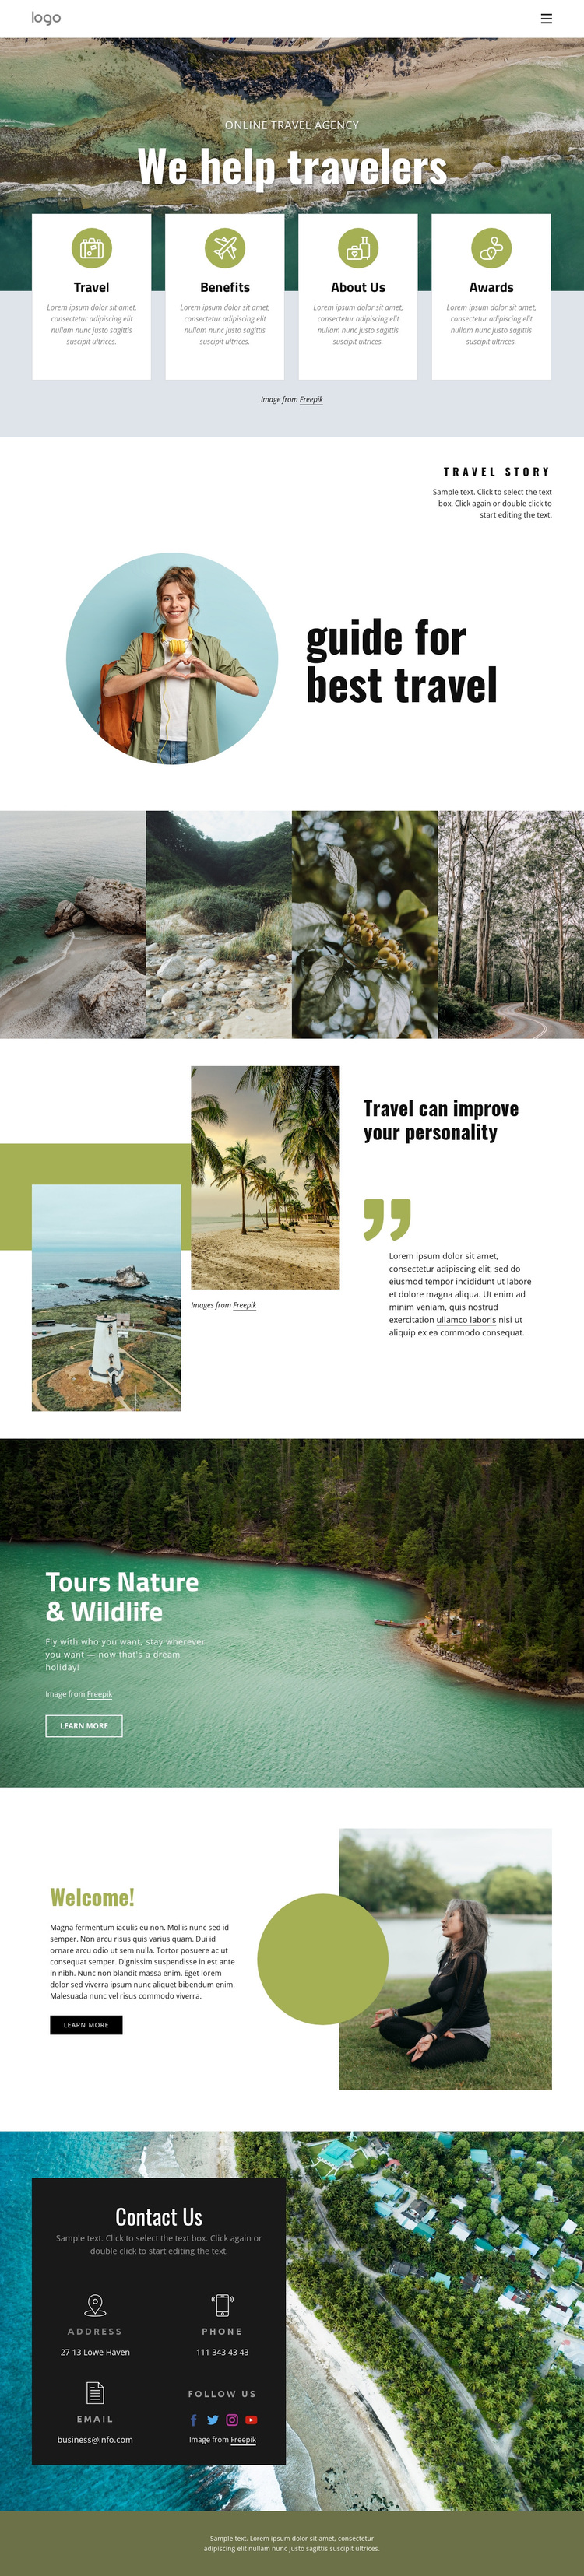 We help manage your trip Template